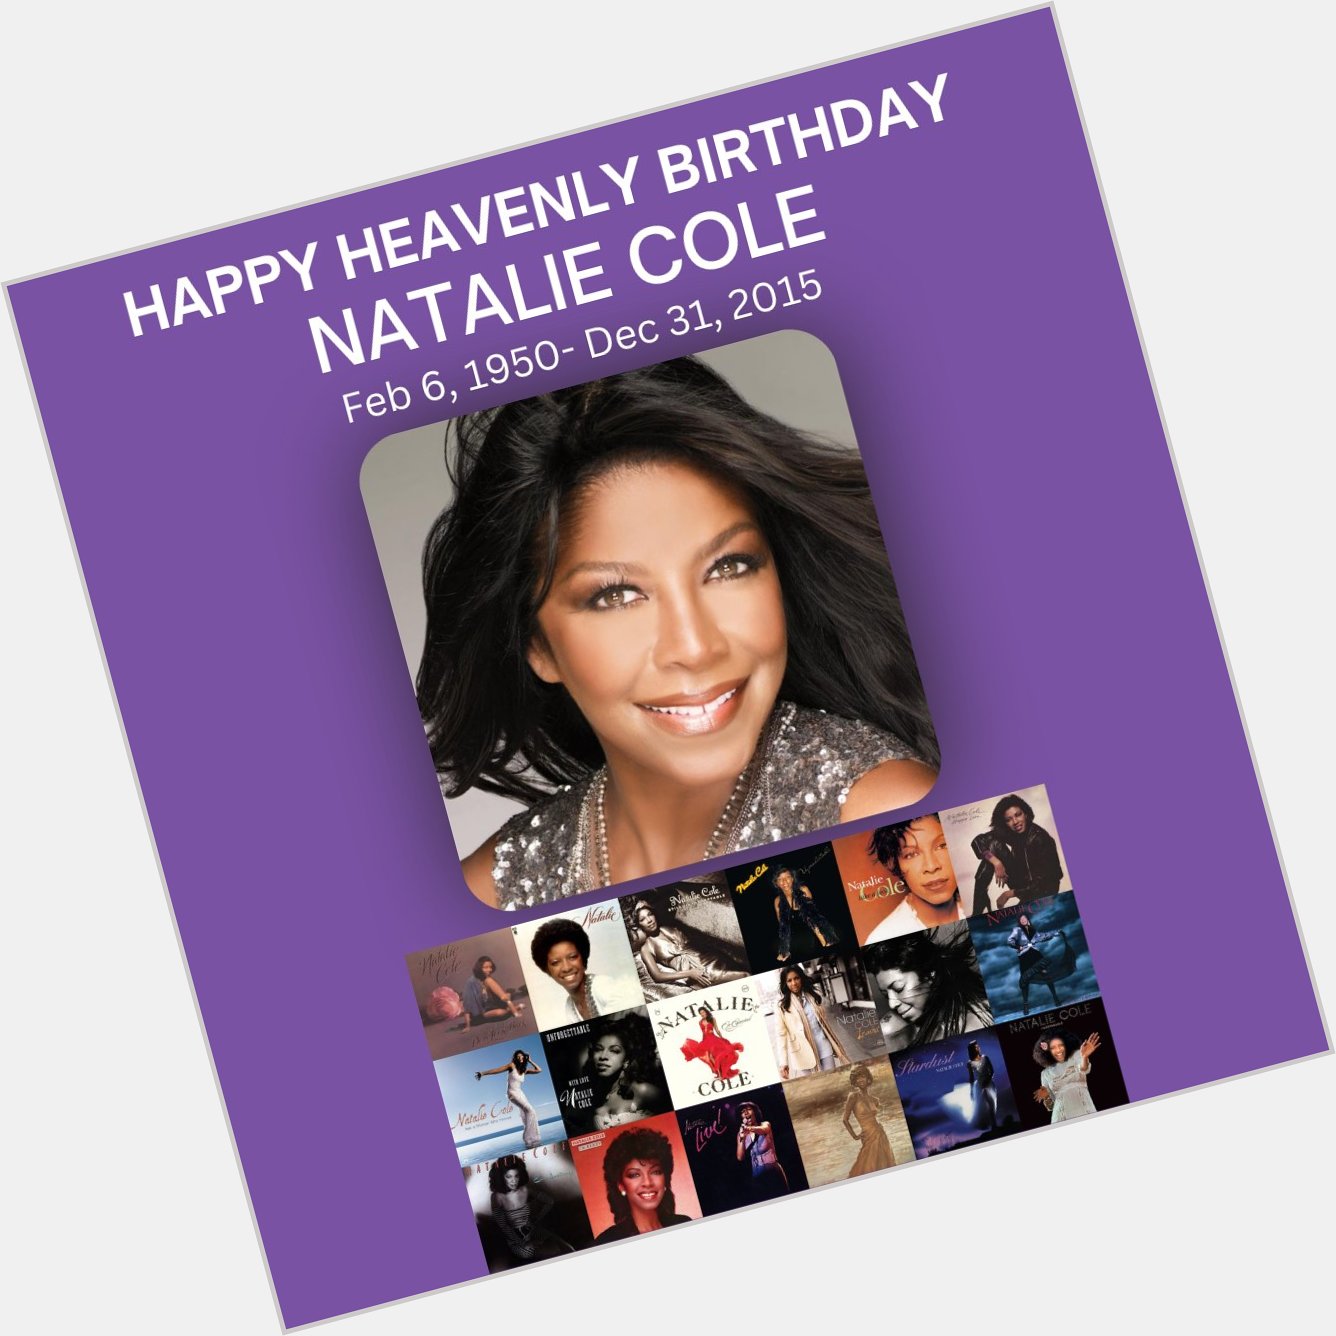 Wishing a Happy Heavenly Birthday to Natalie Cole! 